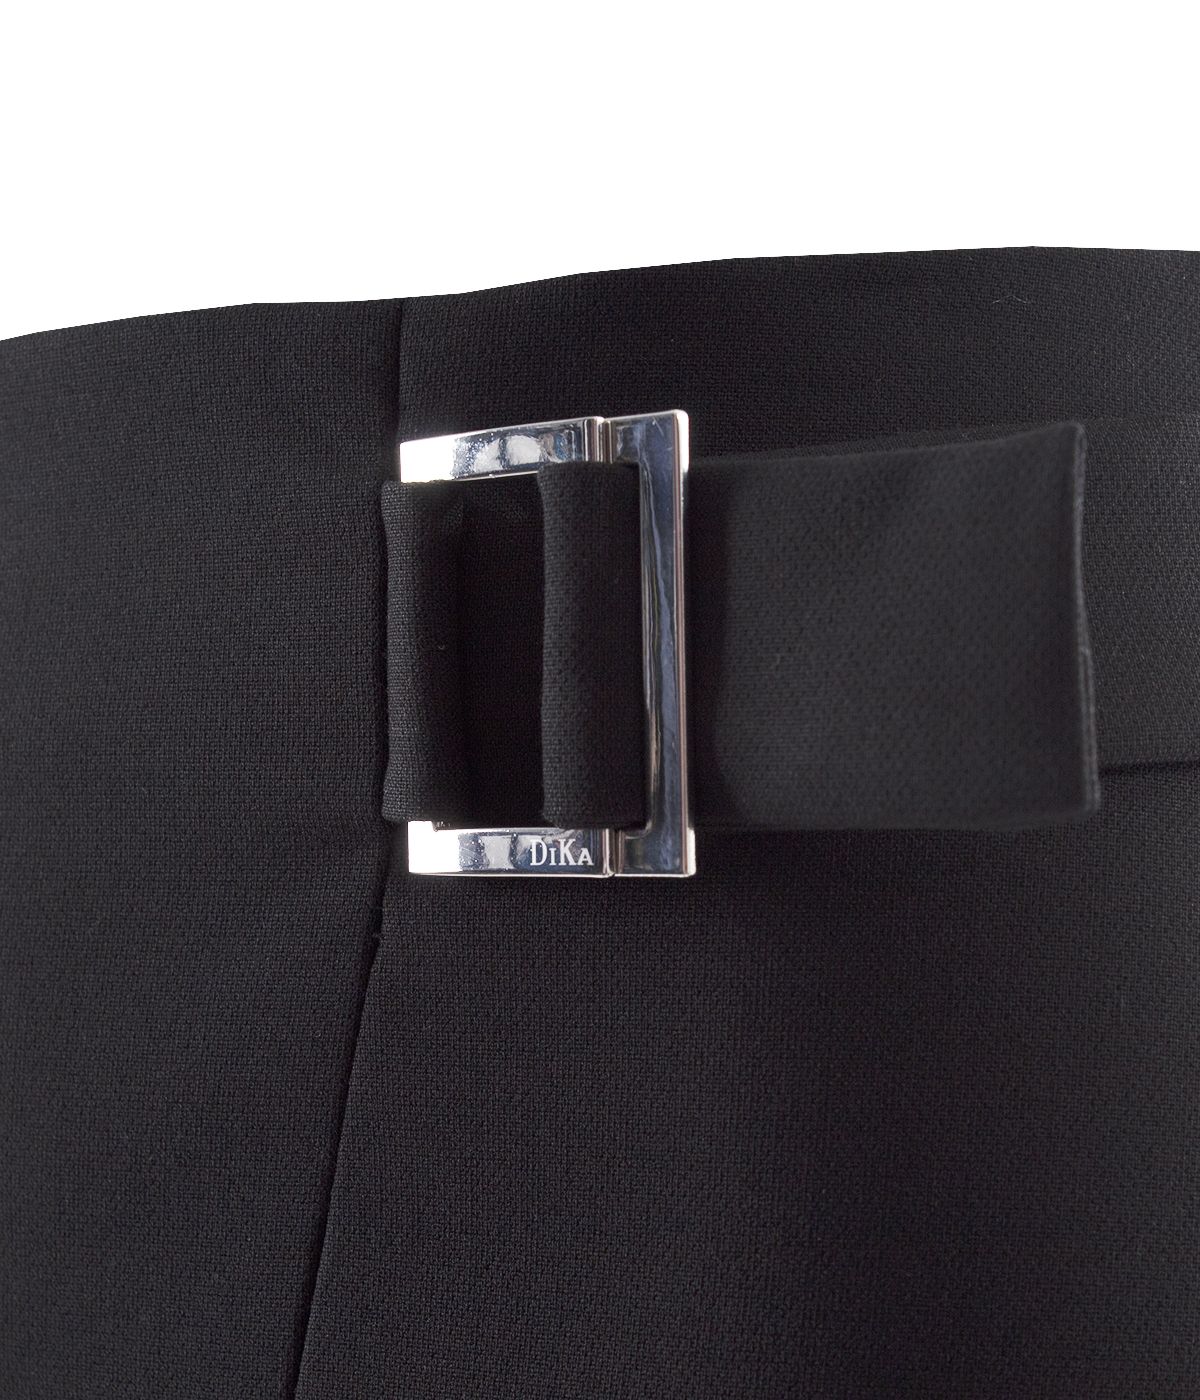 Pencil skirt with front slit, diagonal seam and decorative buckle on the waistline 2